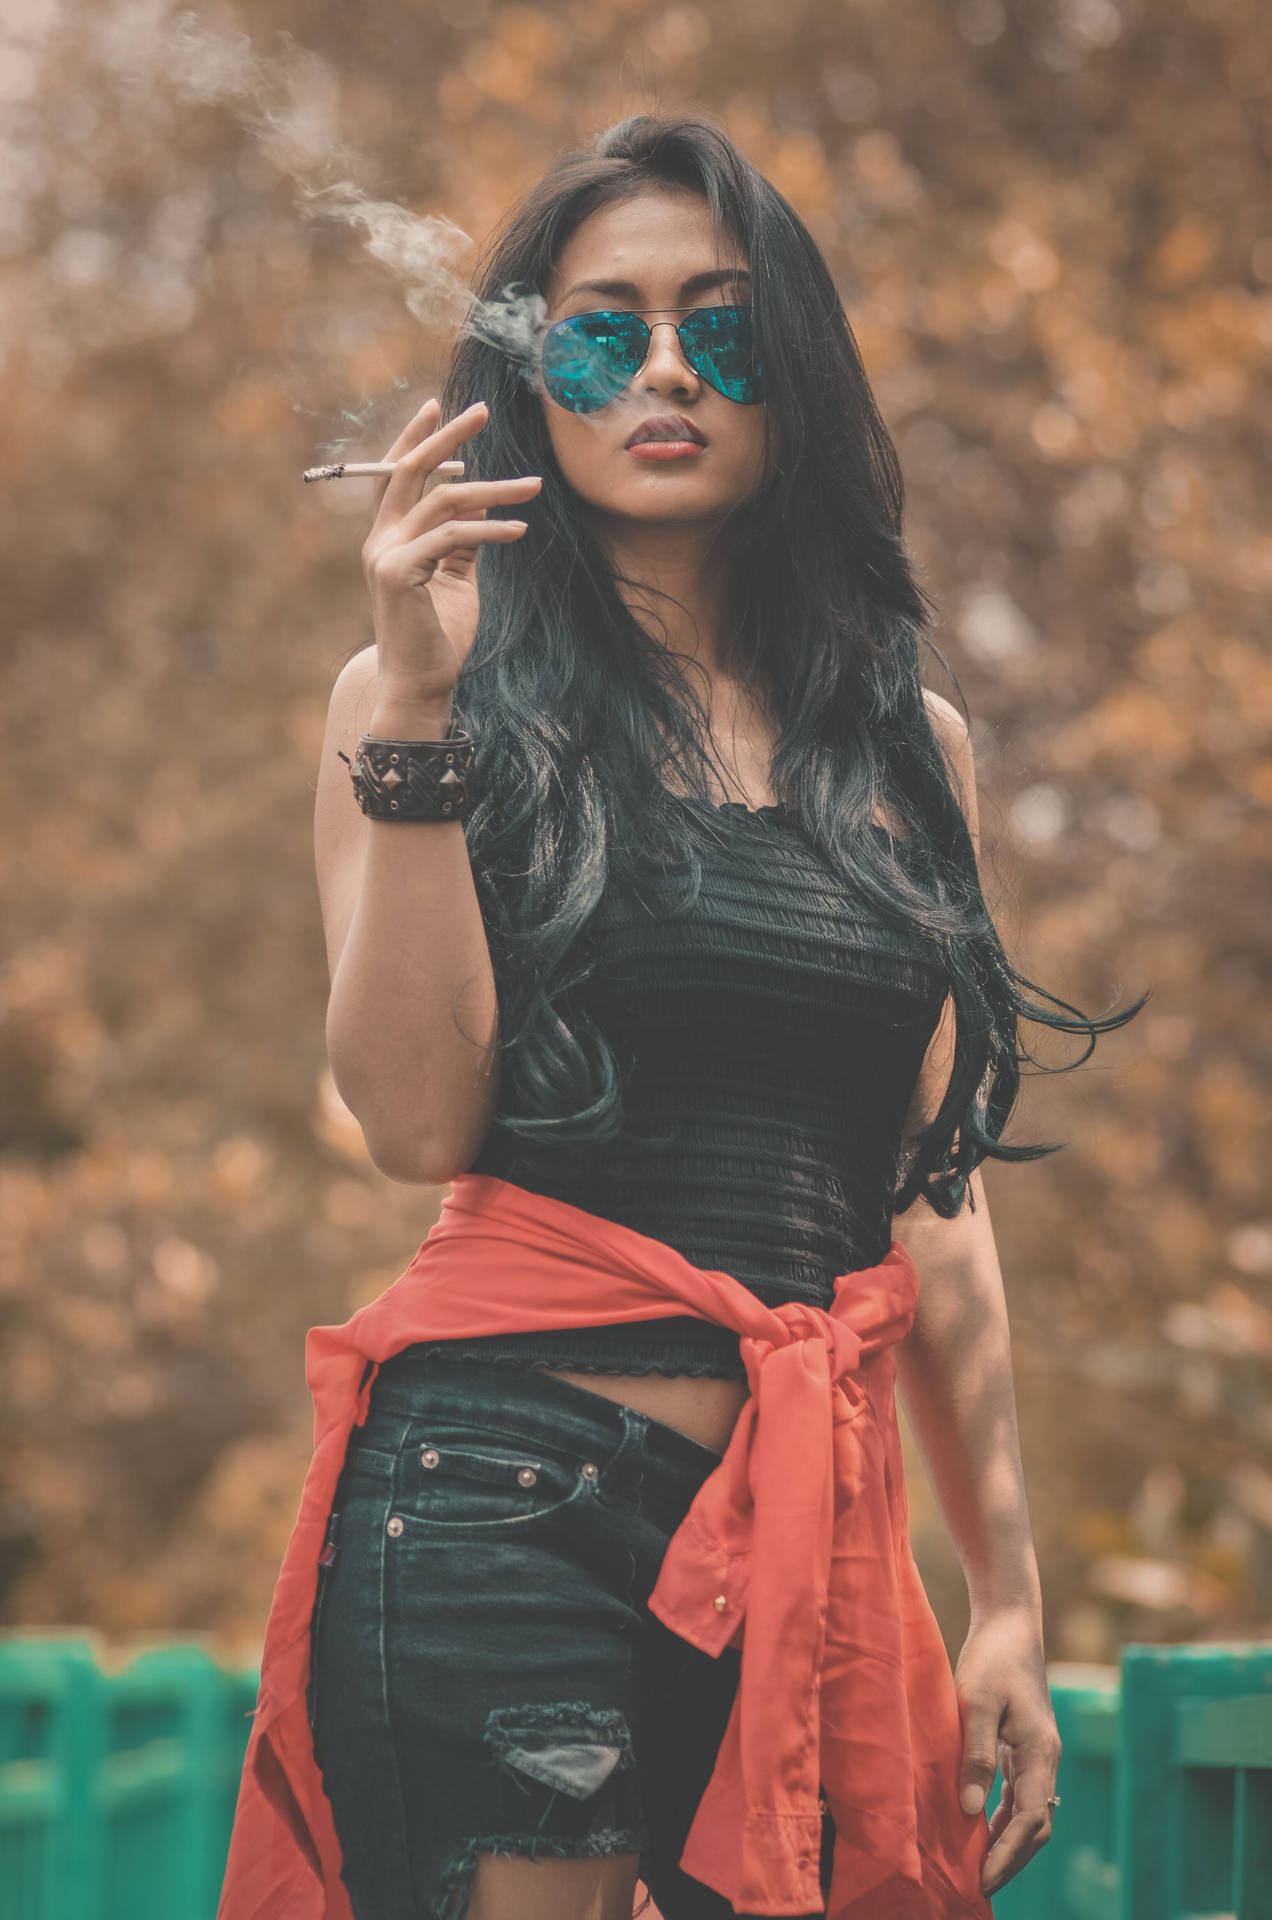 Cool Attitude Girl Smoking And Wearing Sunglasses Background